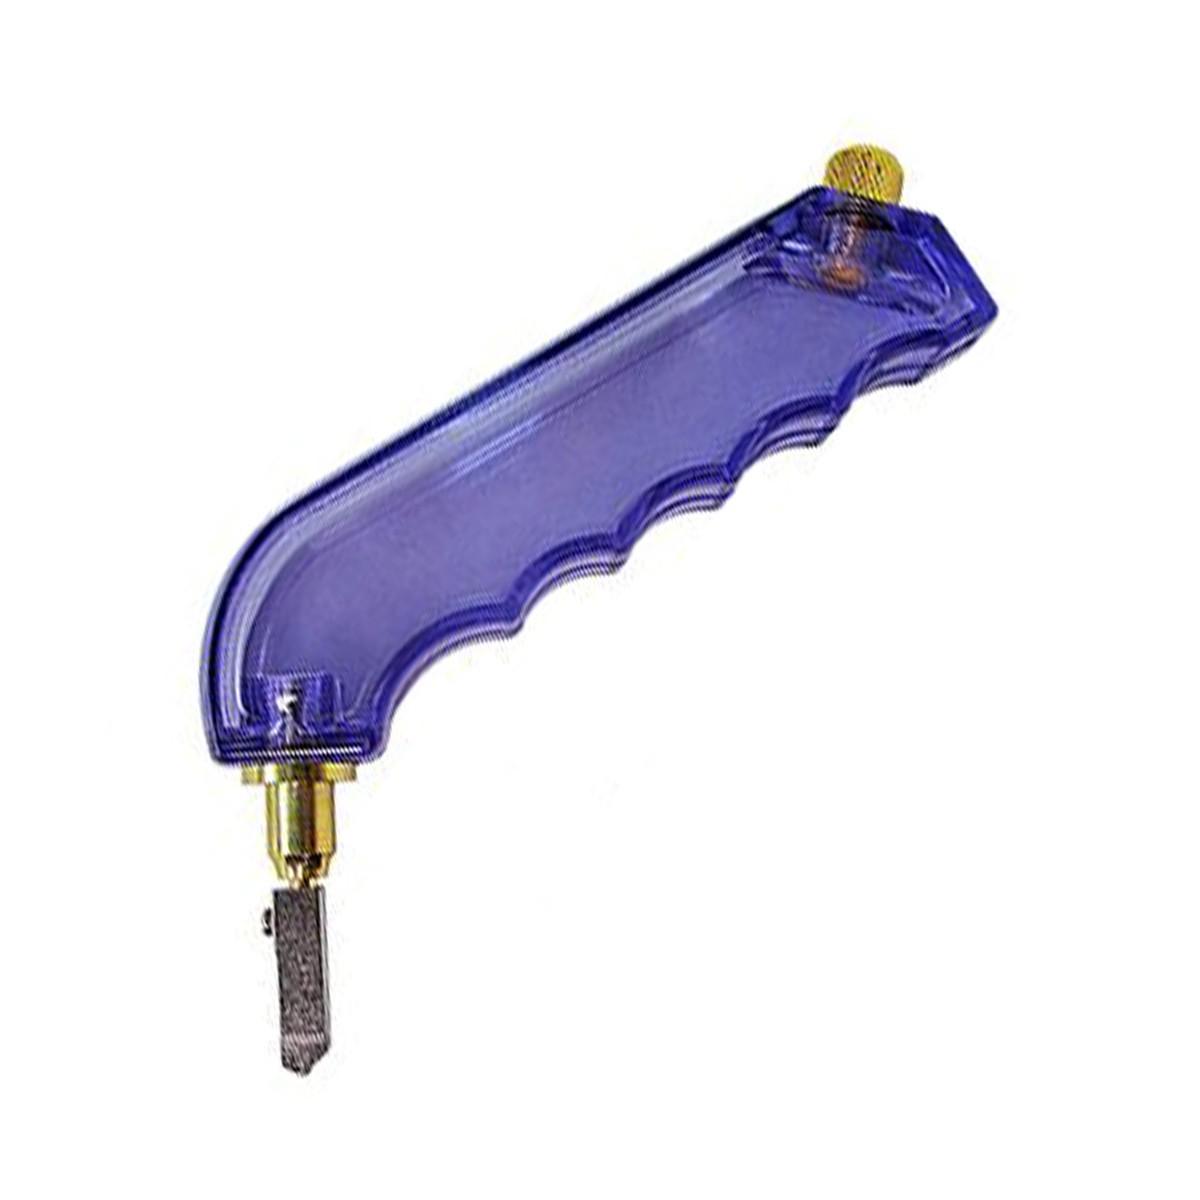 IMT Pistol Grip Oil Feed Glass Cutter Tungsten Carbide, Professional Stained Glass Cutting Tool with Extra Replaceable Head and Oil Reservoir- 2mm